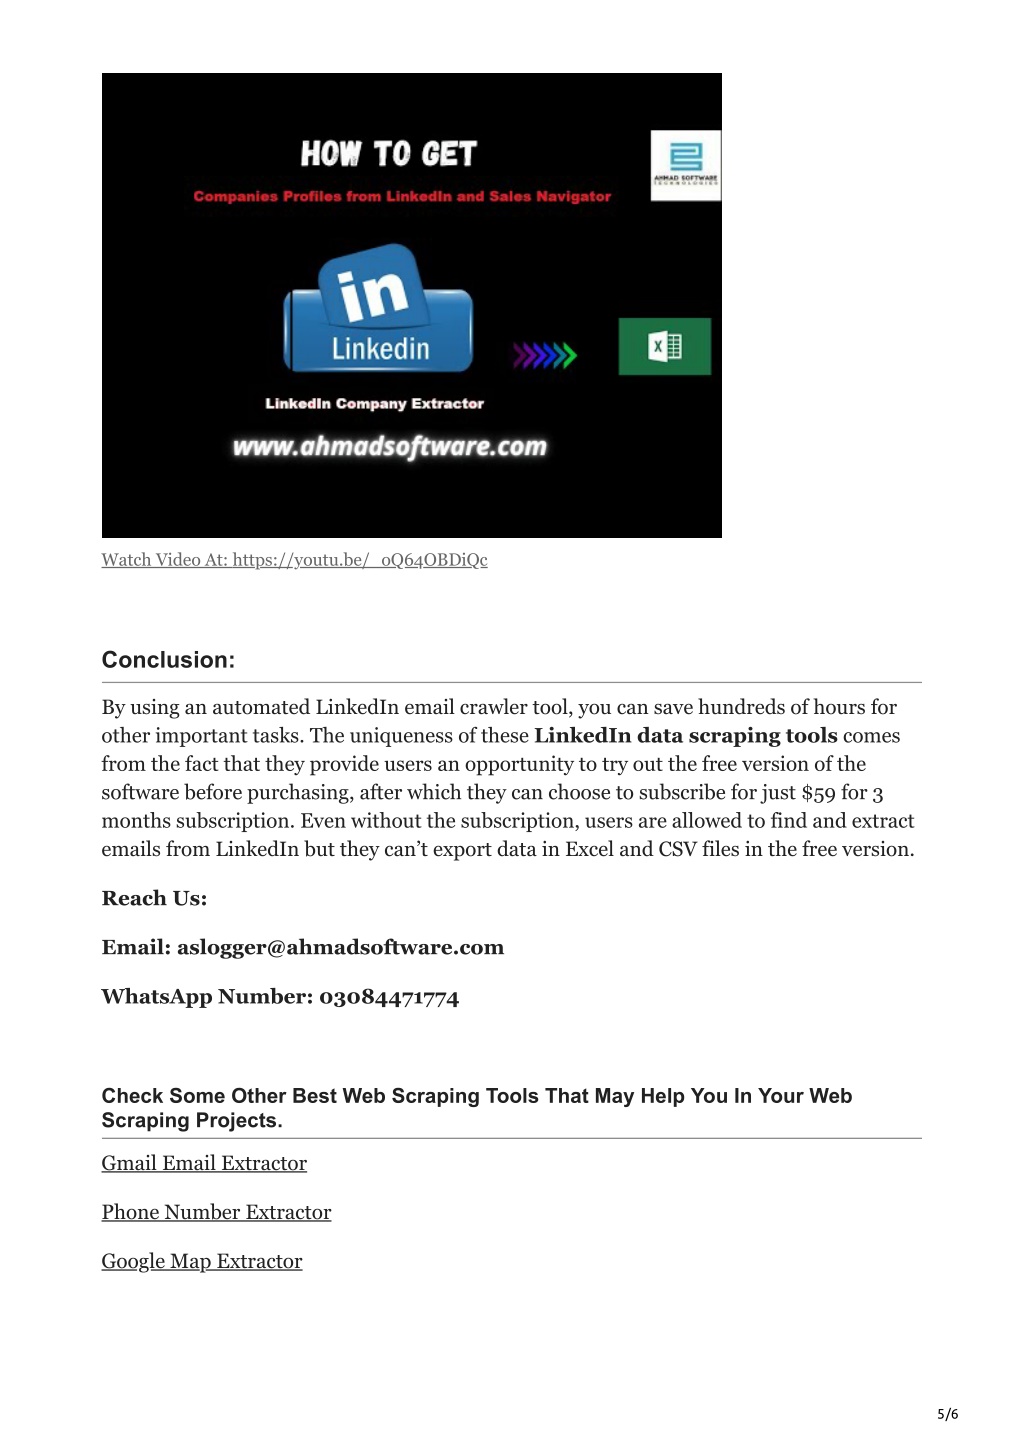 linkedin email extractor free